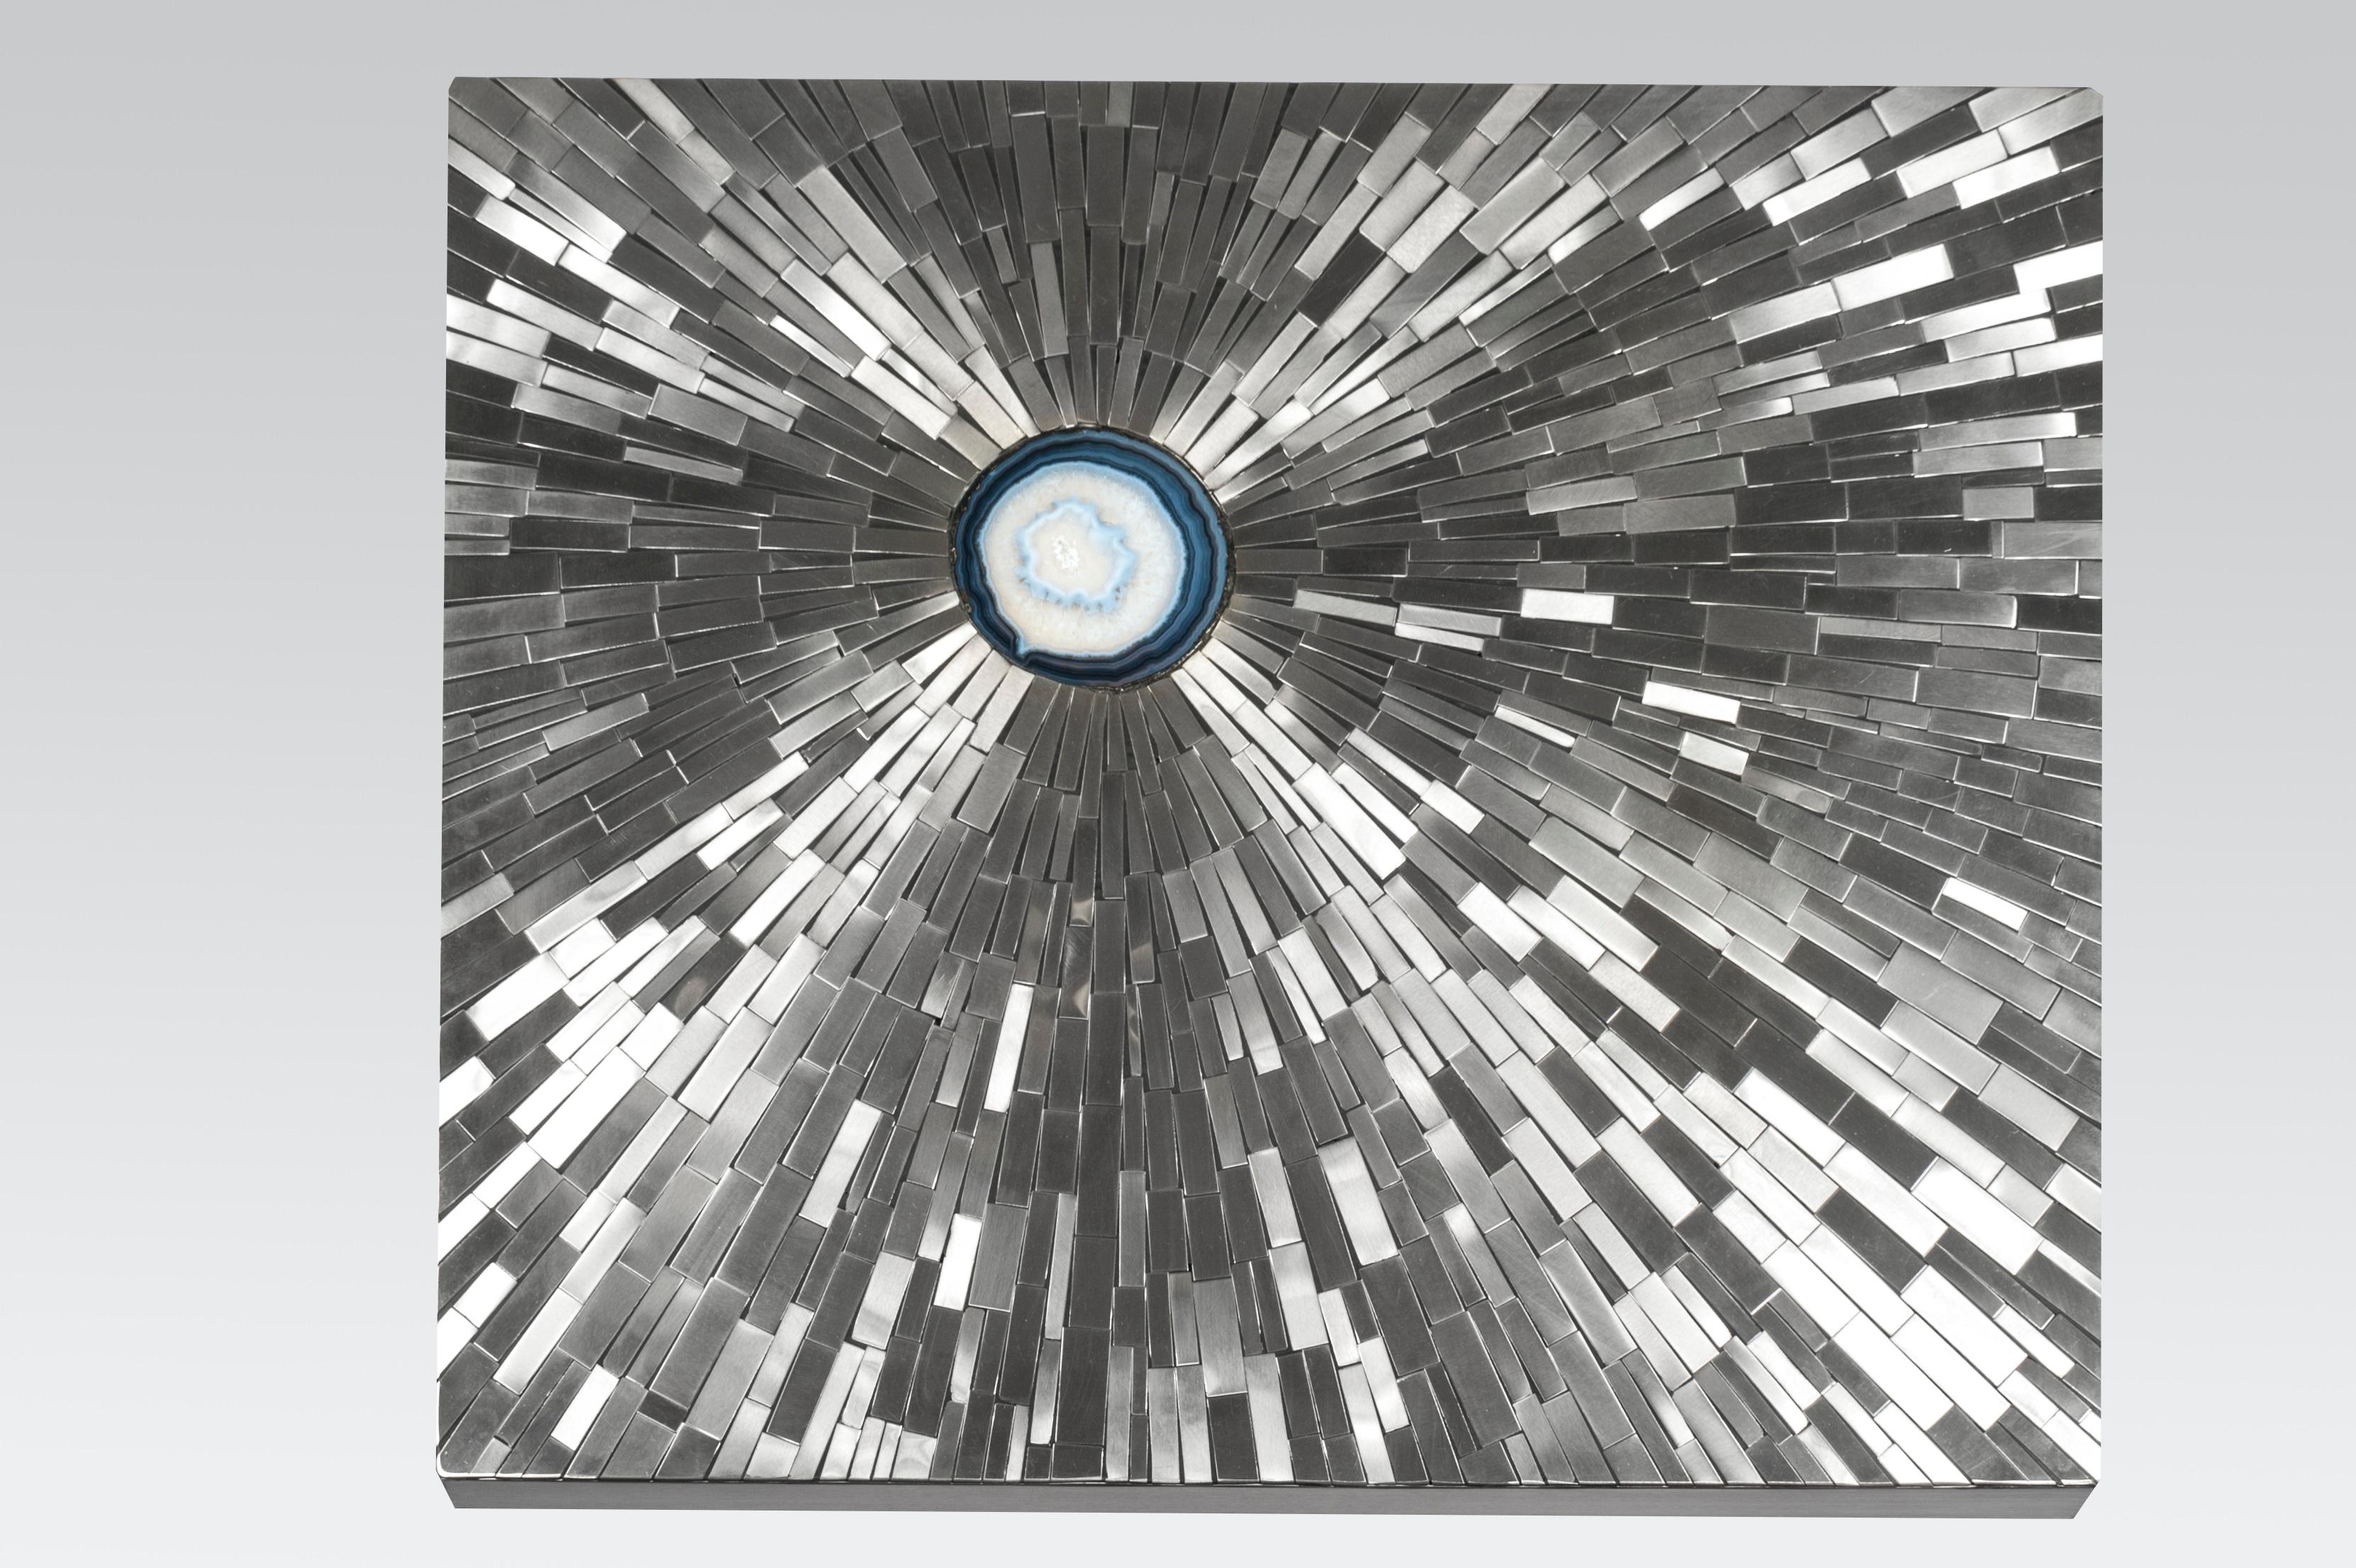 Belgian Pair of Side Table in Stainless Steel Mosaic Inlay Agates by Stan Usel